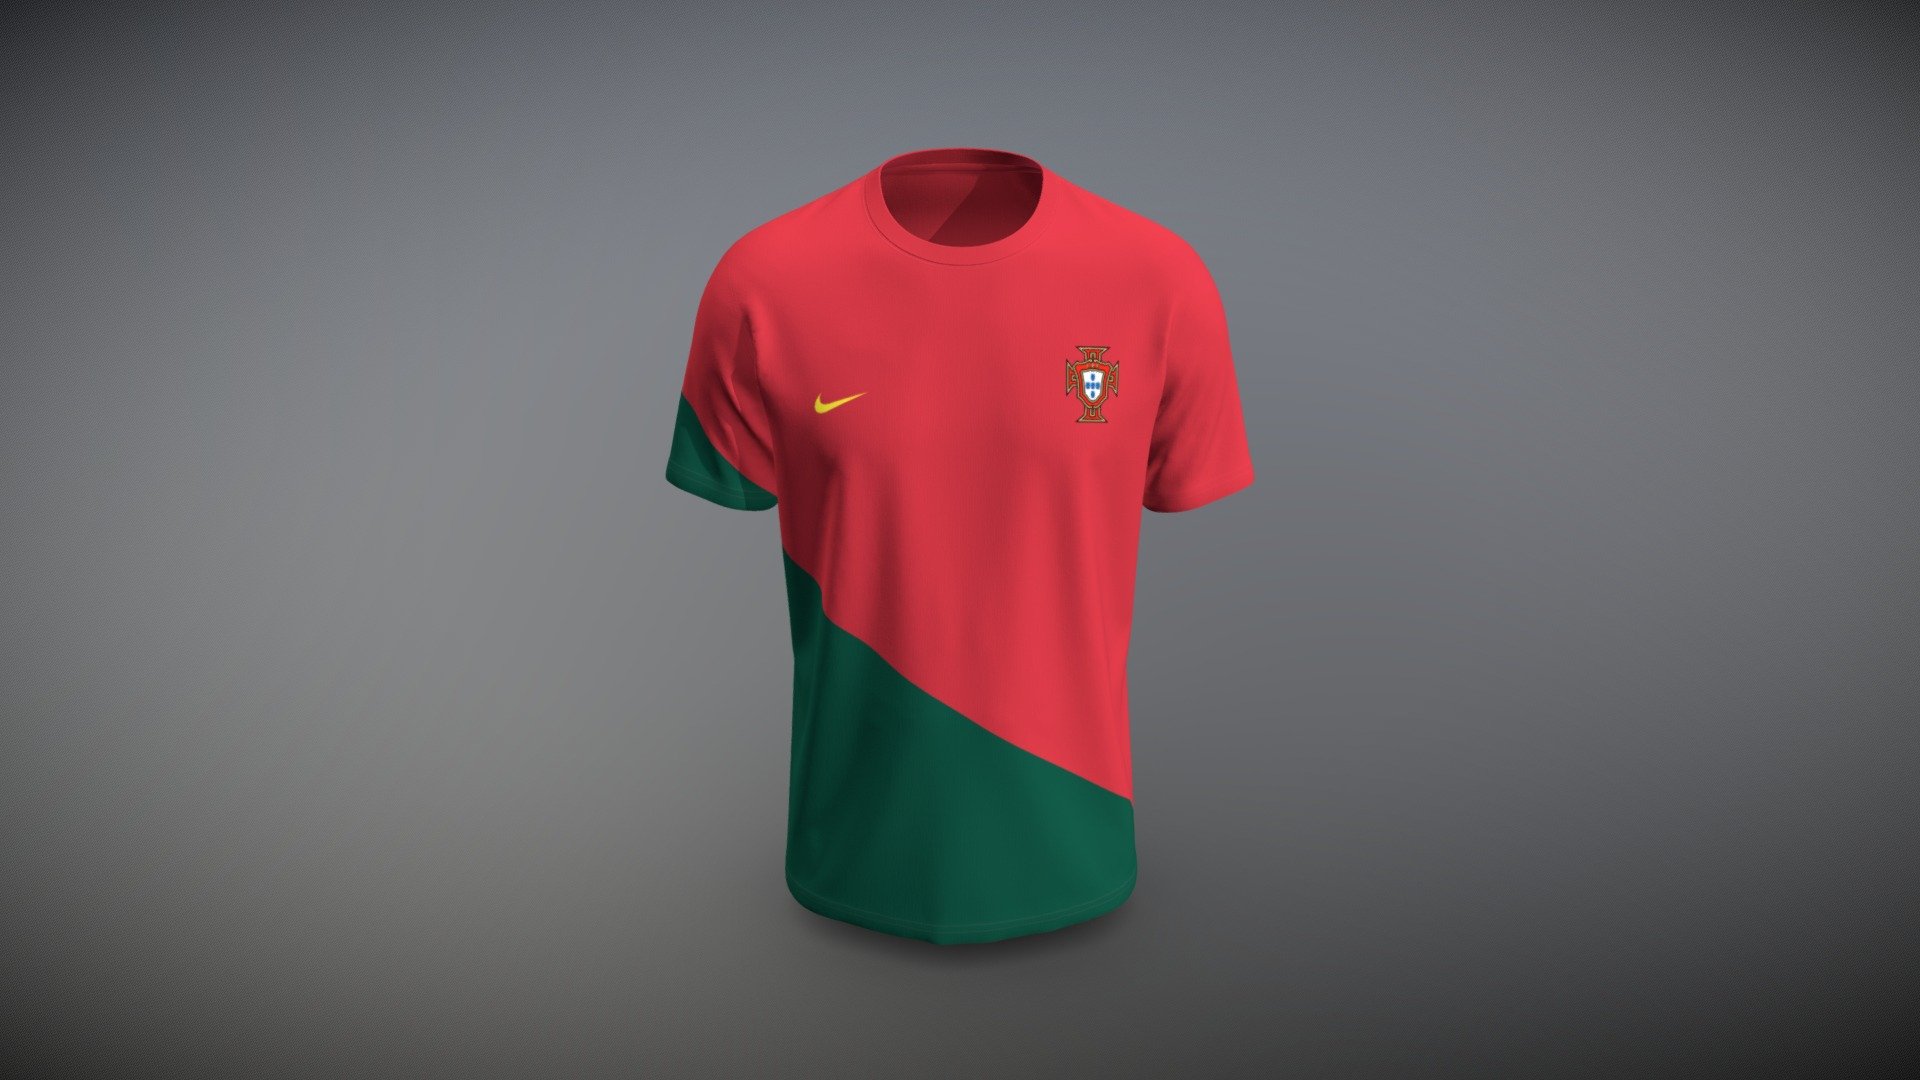 Cloth Title = Portugal Replica World Cup Official Home Jersey 

SKU = DG100044 

Category = Unisex 

Product Type = T-Shirt 

Cloth Length = Regular 

Body Fit = Loose Fit 

Occasion = Casual  

Sleeve Style = Set In Sleeve


Our Services:

3D Apparel Design.

OBJ,FBX,GLTF Making with High/Low Poly.

Fabric Digitalization.

Mockup making.

3D Teck Pack.

Pattern Making.

2D Illustration.

Cloth Animation and 360 Spin Video.


Contact us:- 

Email: info@digitalfashionwear.com 

Website: https://digitalfashionwear.com 


We designed all the types of cloth specially focused on product visualization, e-commerce, fitting, and production. 

We will design: 

T-shirts 

Polo shirts 

Hoodies 

Sweatshirt 

Jackets 

Shirts 

TankTops 

Trousers 

Bras 

Underwear 

Blazer 

Aprons 

Leggings 

and All Fashion items. 





Our goal is to make sure what we provide you, meets your demand 3d model